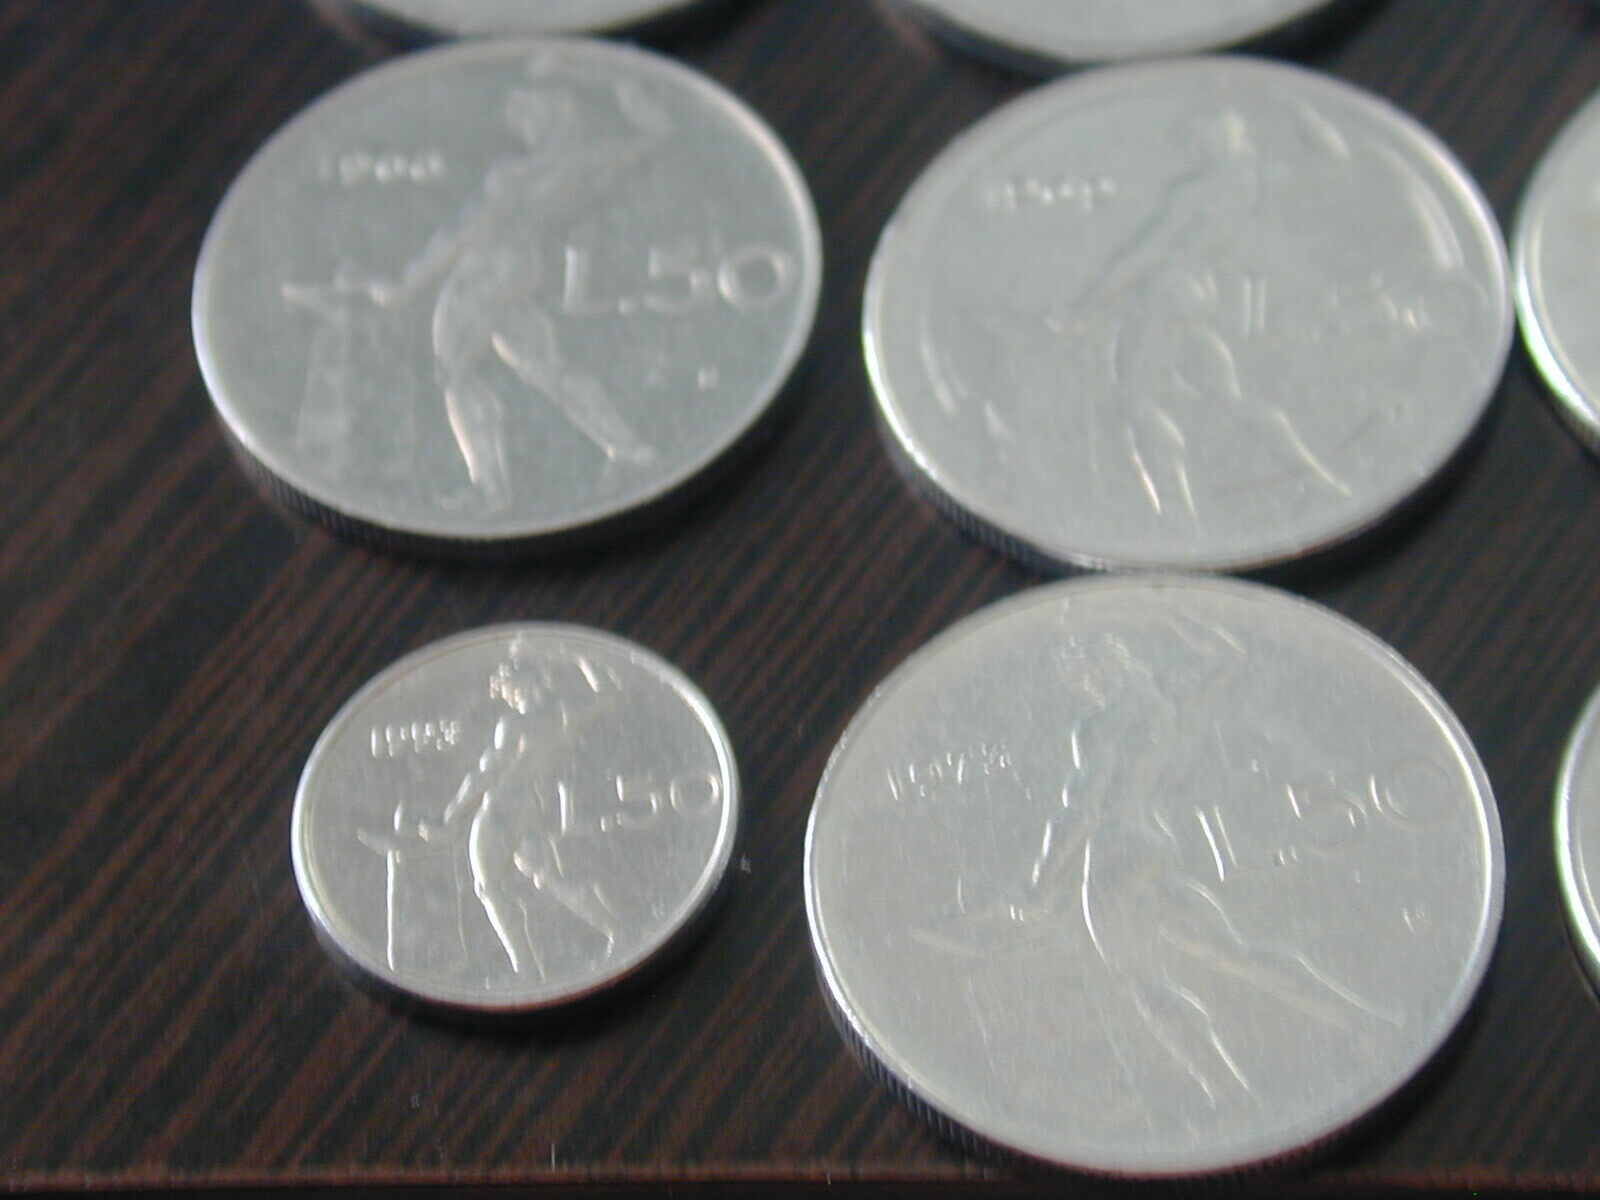 ITALY 19 pc Stainless Steel 50 lire 1955-78 KM95 16 pcs and 1 93 KM95a Nice Lot Без бренда - фотография #8